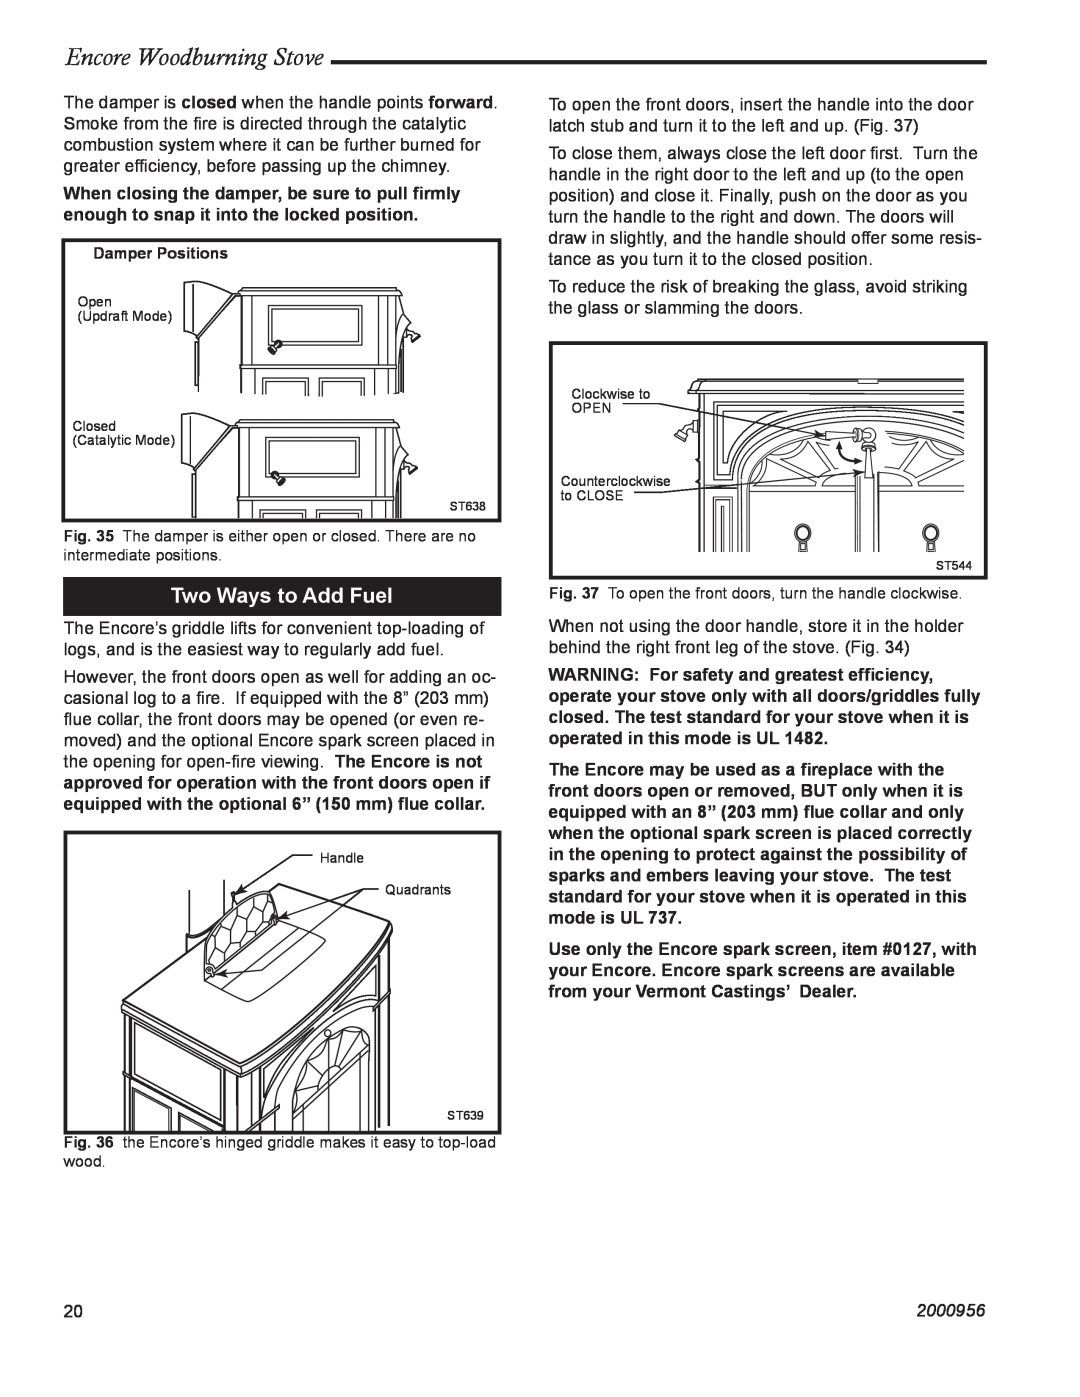 Vermont Casting 2550 installation instructions Two Ways to Add Fuel, Encore Woodburning Stove, 2000956 